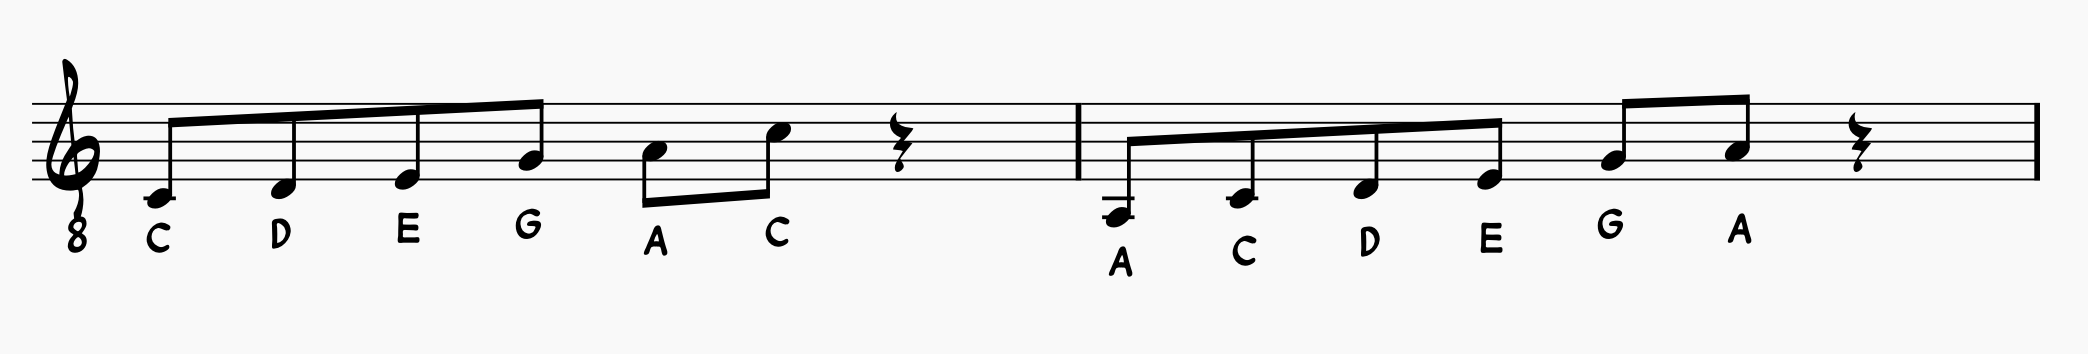 Blues Scale Guide: C major pent. scale and minor pentatonic scale share the same sequence of notes 